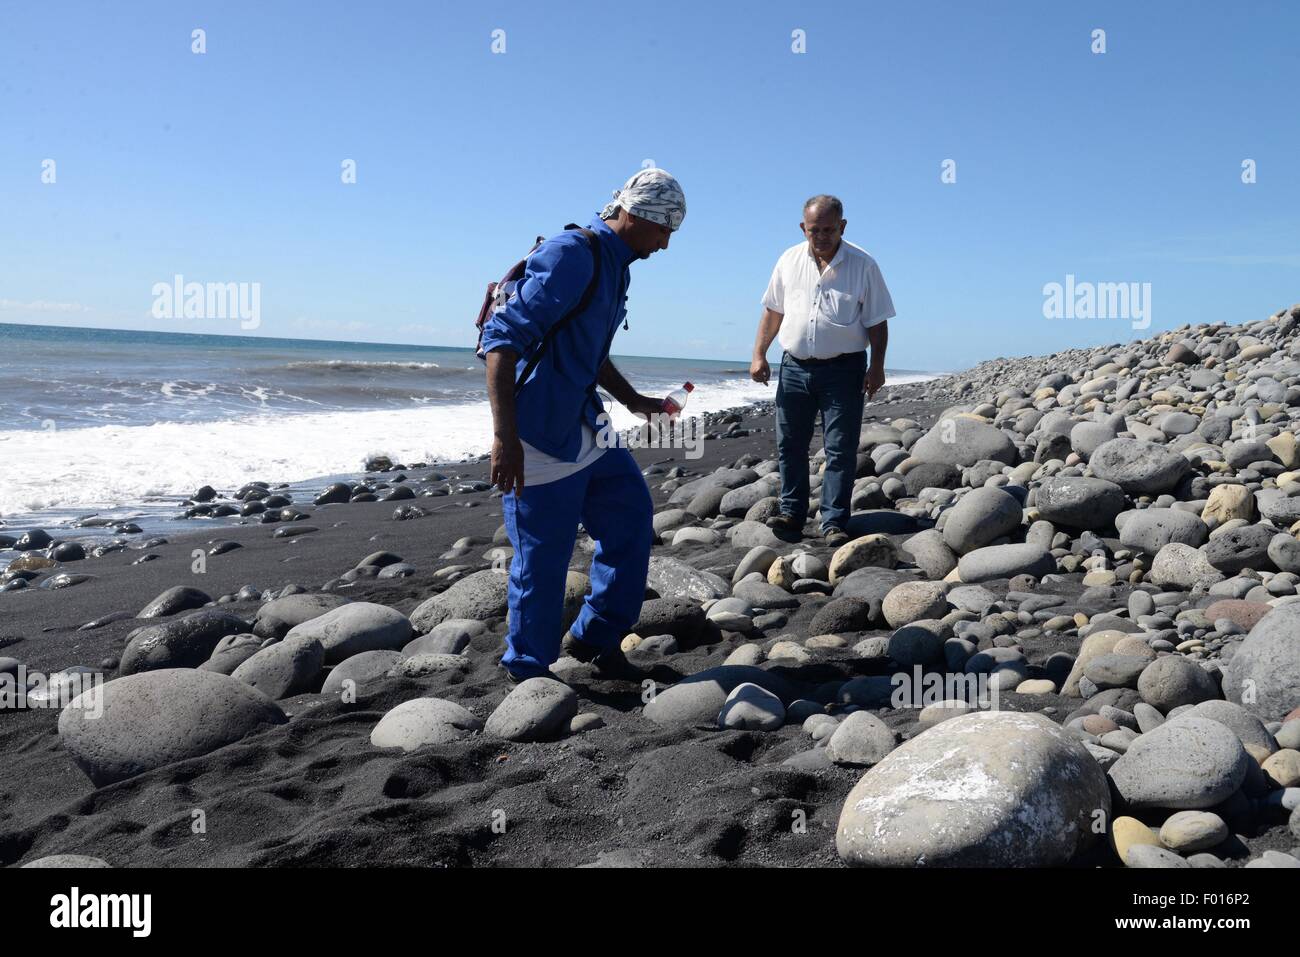 The Reunion Island. 31st July, 2015. People clean the beach of Reunion Island, on Jul.31, 2015. Verification had confirmed that the debris discovered on Reunion Island belongs to missing Malaysian Airlines flight MH370, Malaysian Prime Minister Najib Razak announced early Thursday. © Dong Ruifeng/Xinhua/Alamy Live News Stock Photo